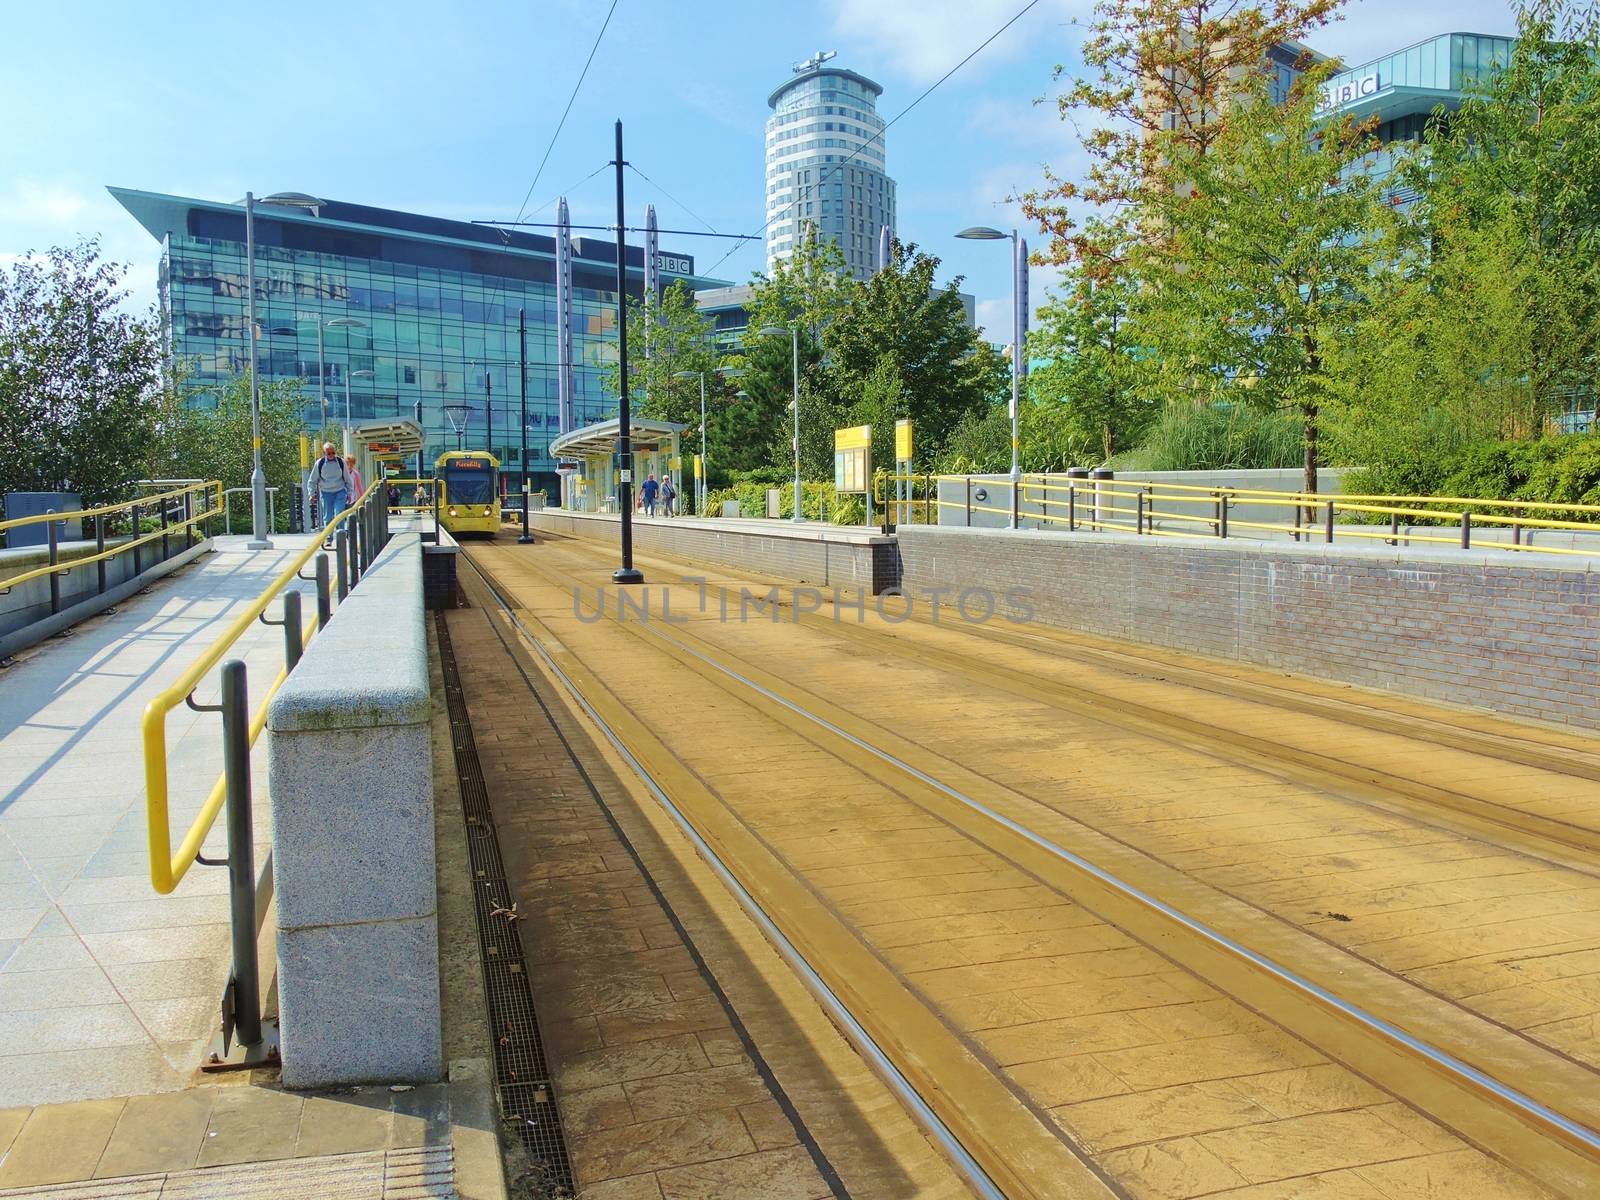 Tram station at Media city UK. by paulst